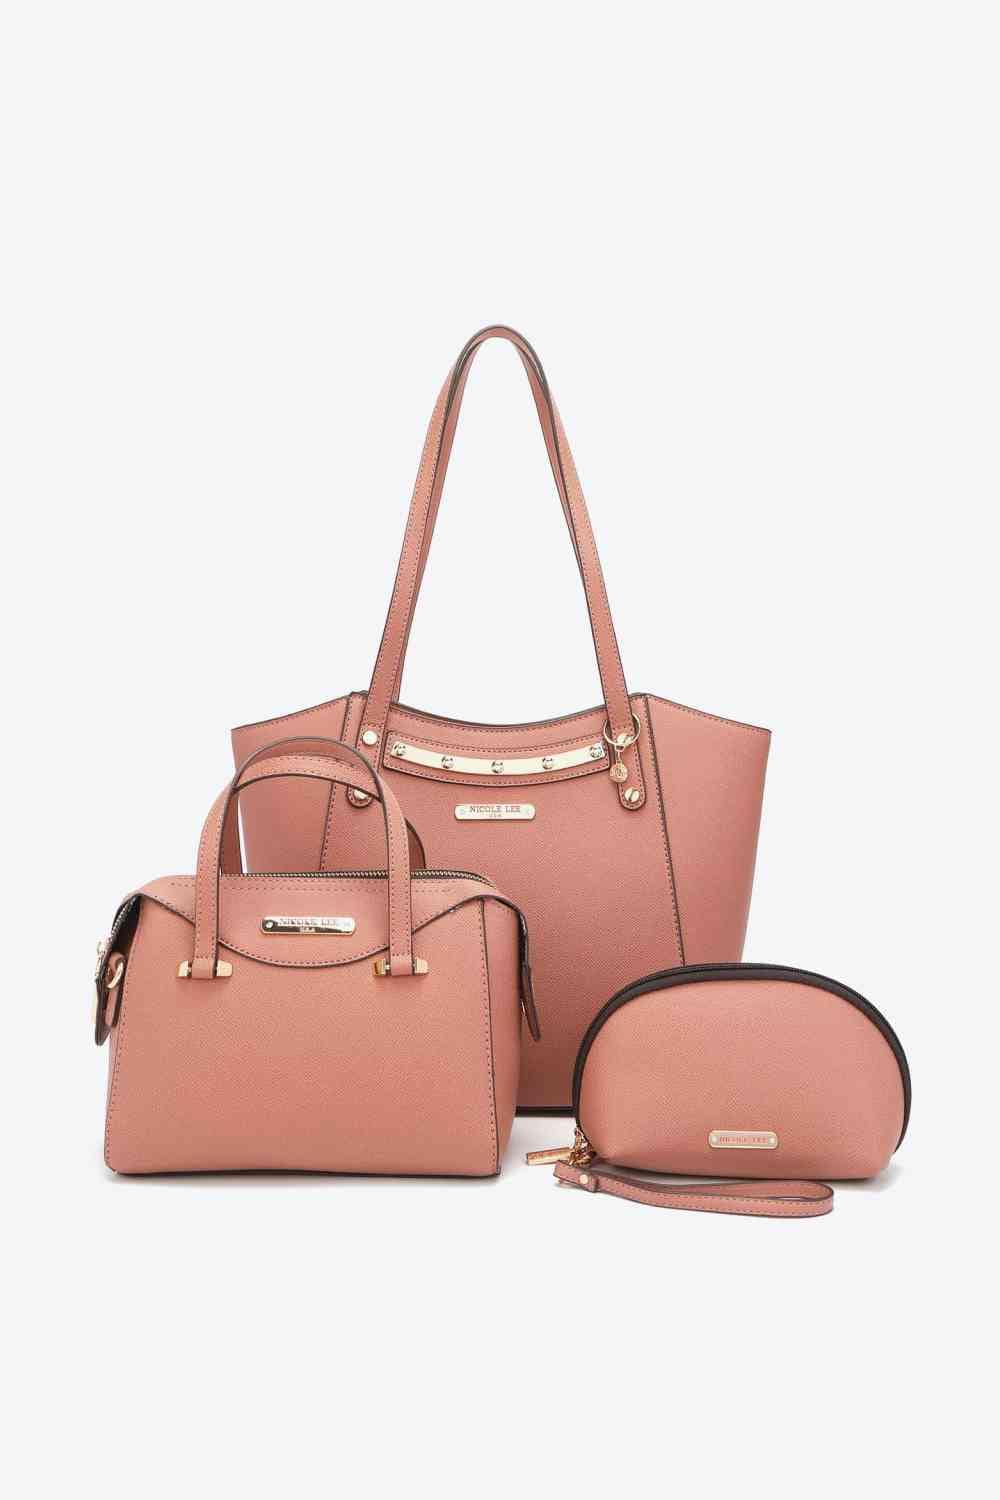 The802Gypsy Handbags, Wallets & Cases Burnt Coral / One Size GYPSY-Nicole Lee USA-At My Best Handbag Set